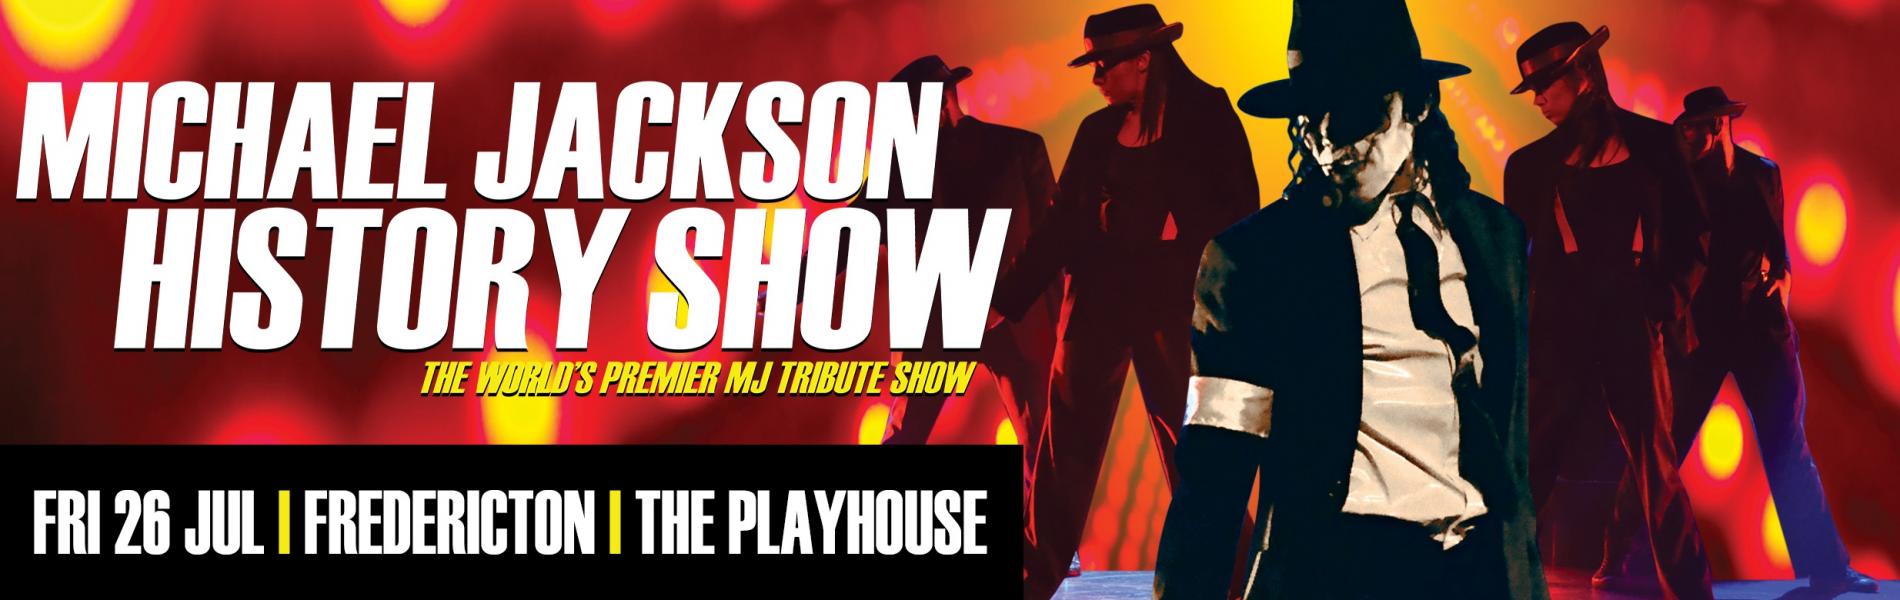 The words Michael Jackson History Show in bold white lettering on a red and yellow background. On the right there is a a man dressed in black and white.